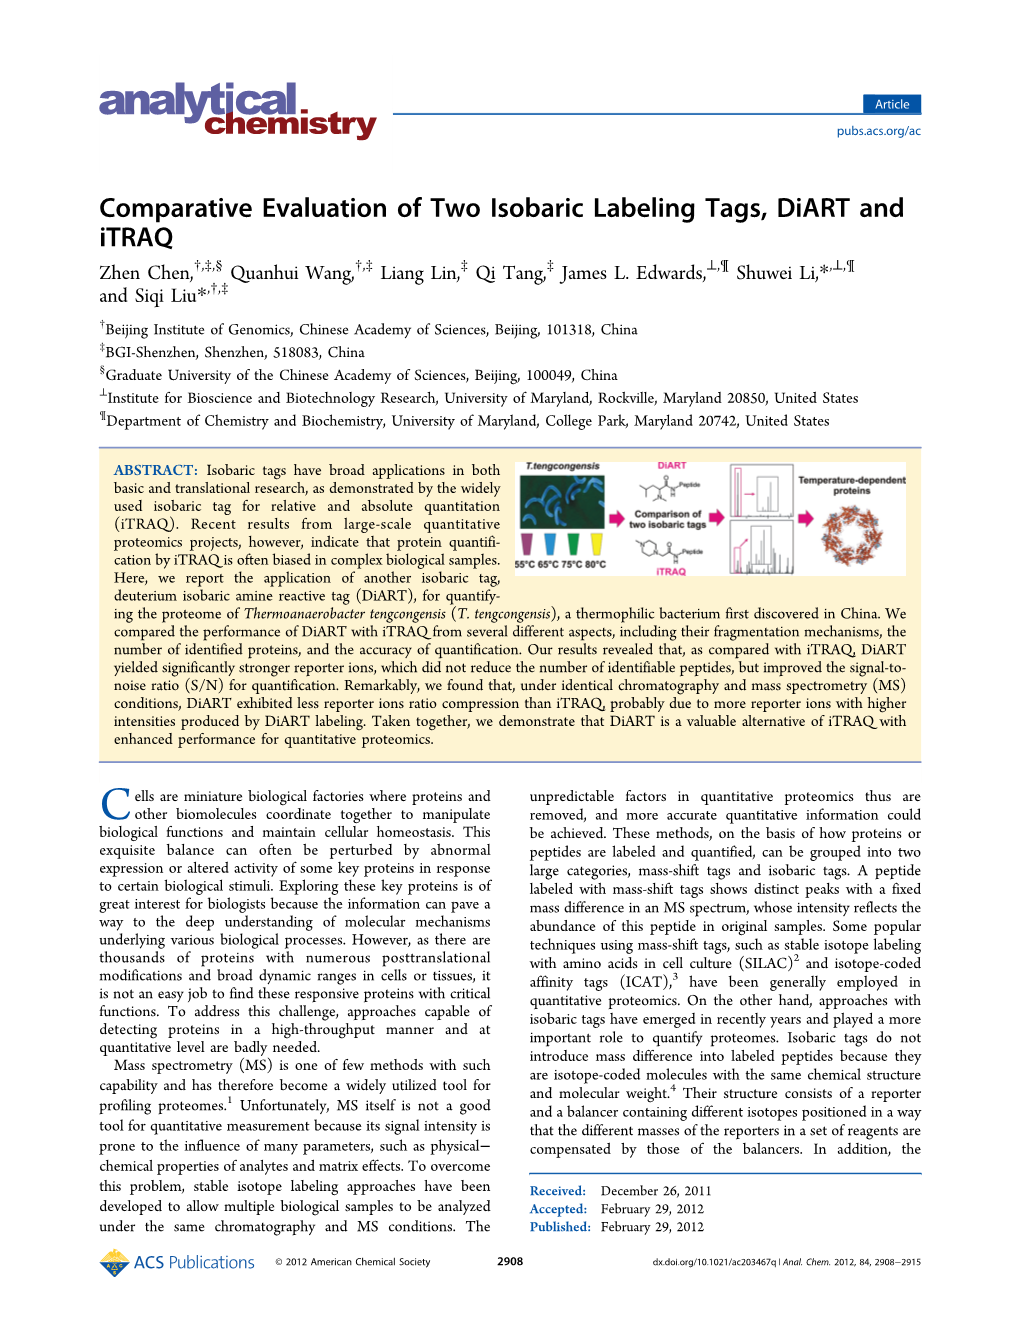 Comparative Evaluation of Two Isobaric Labeling Tags, Diart and Itraq † ‡ § † ‡ ‡ ‡ ⊥ ¶ ⊥ ¶ Zhen Chen, , , Quanhui Wang, , Liang Lin, Qi Tang, James L